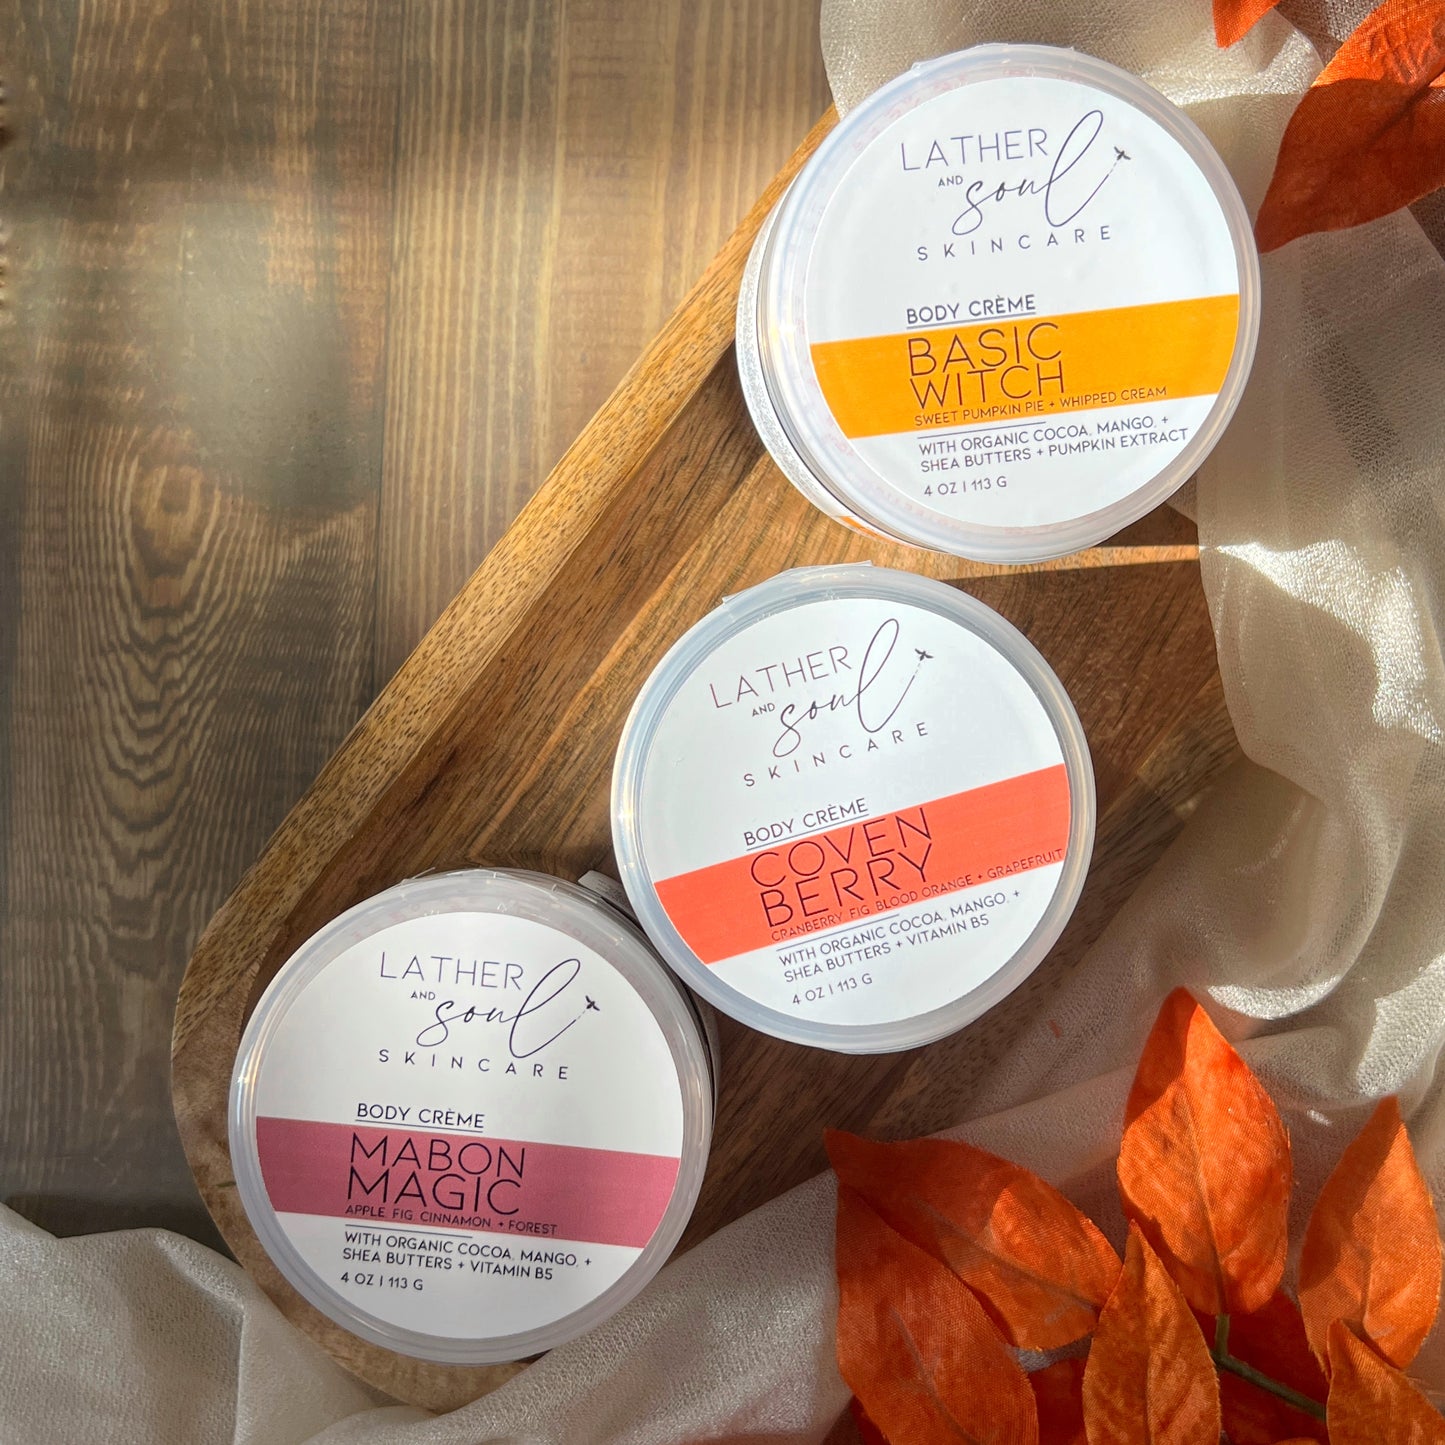 Fall inspired body crèmes from Lather and Soul, on wooden tray.